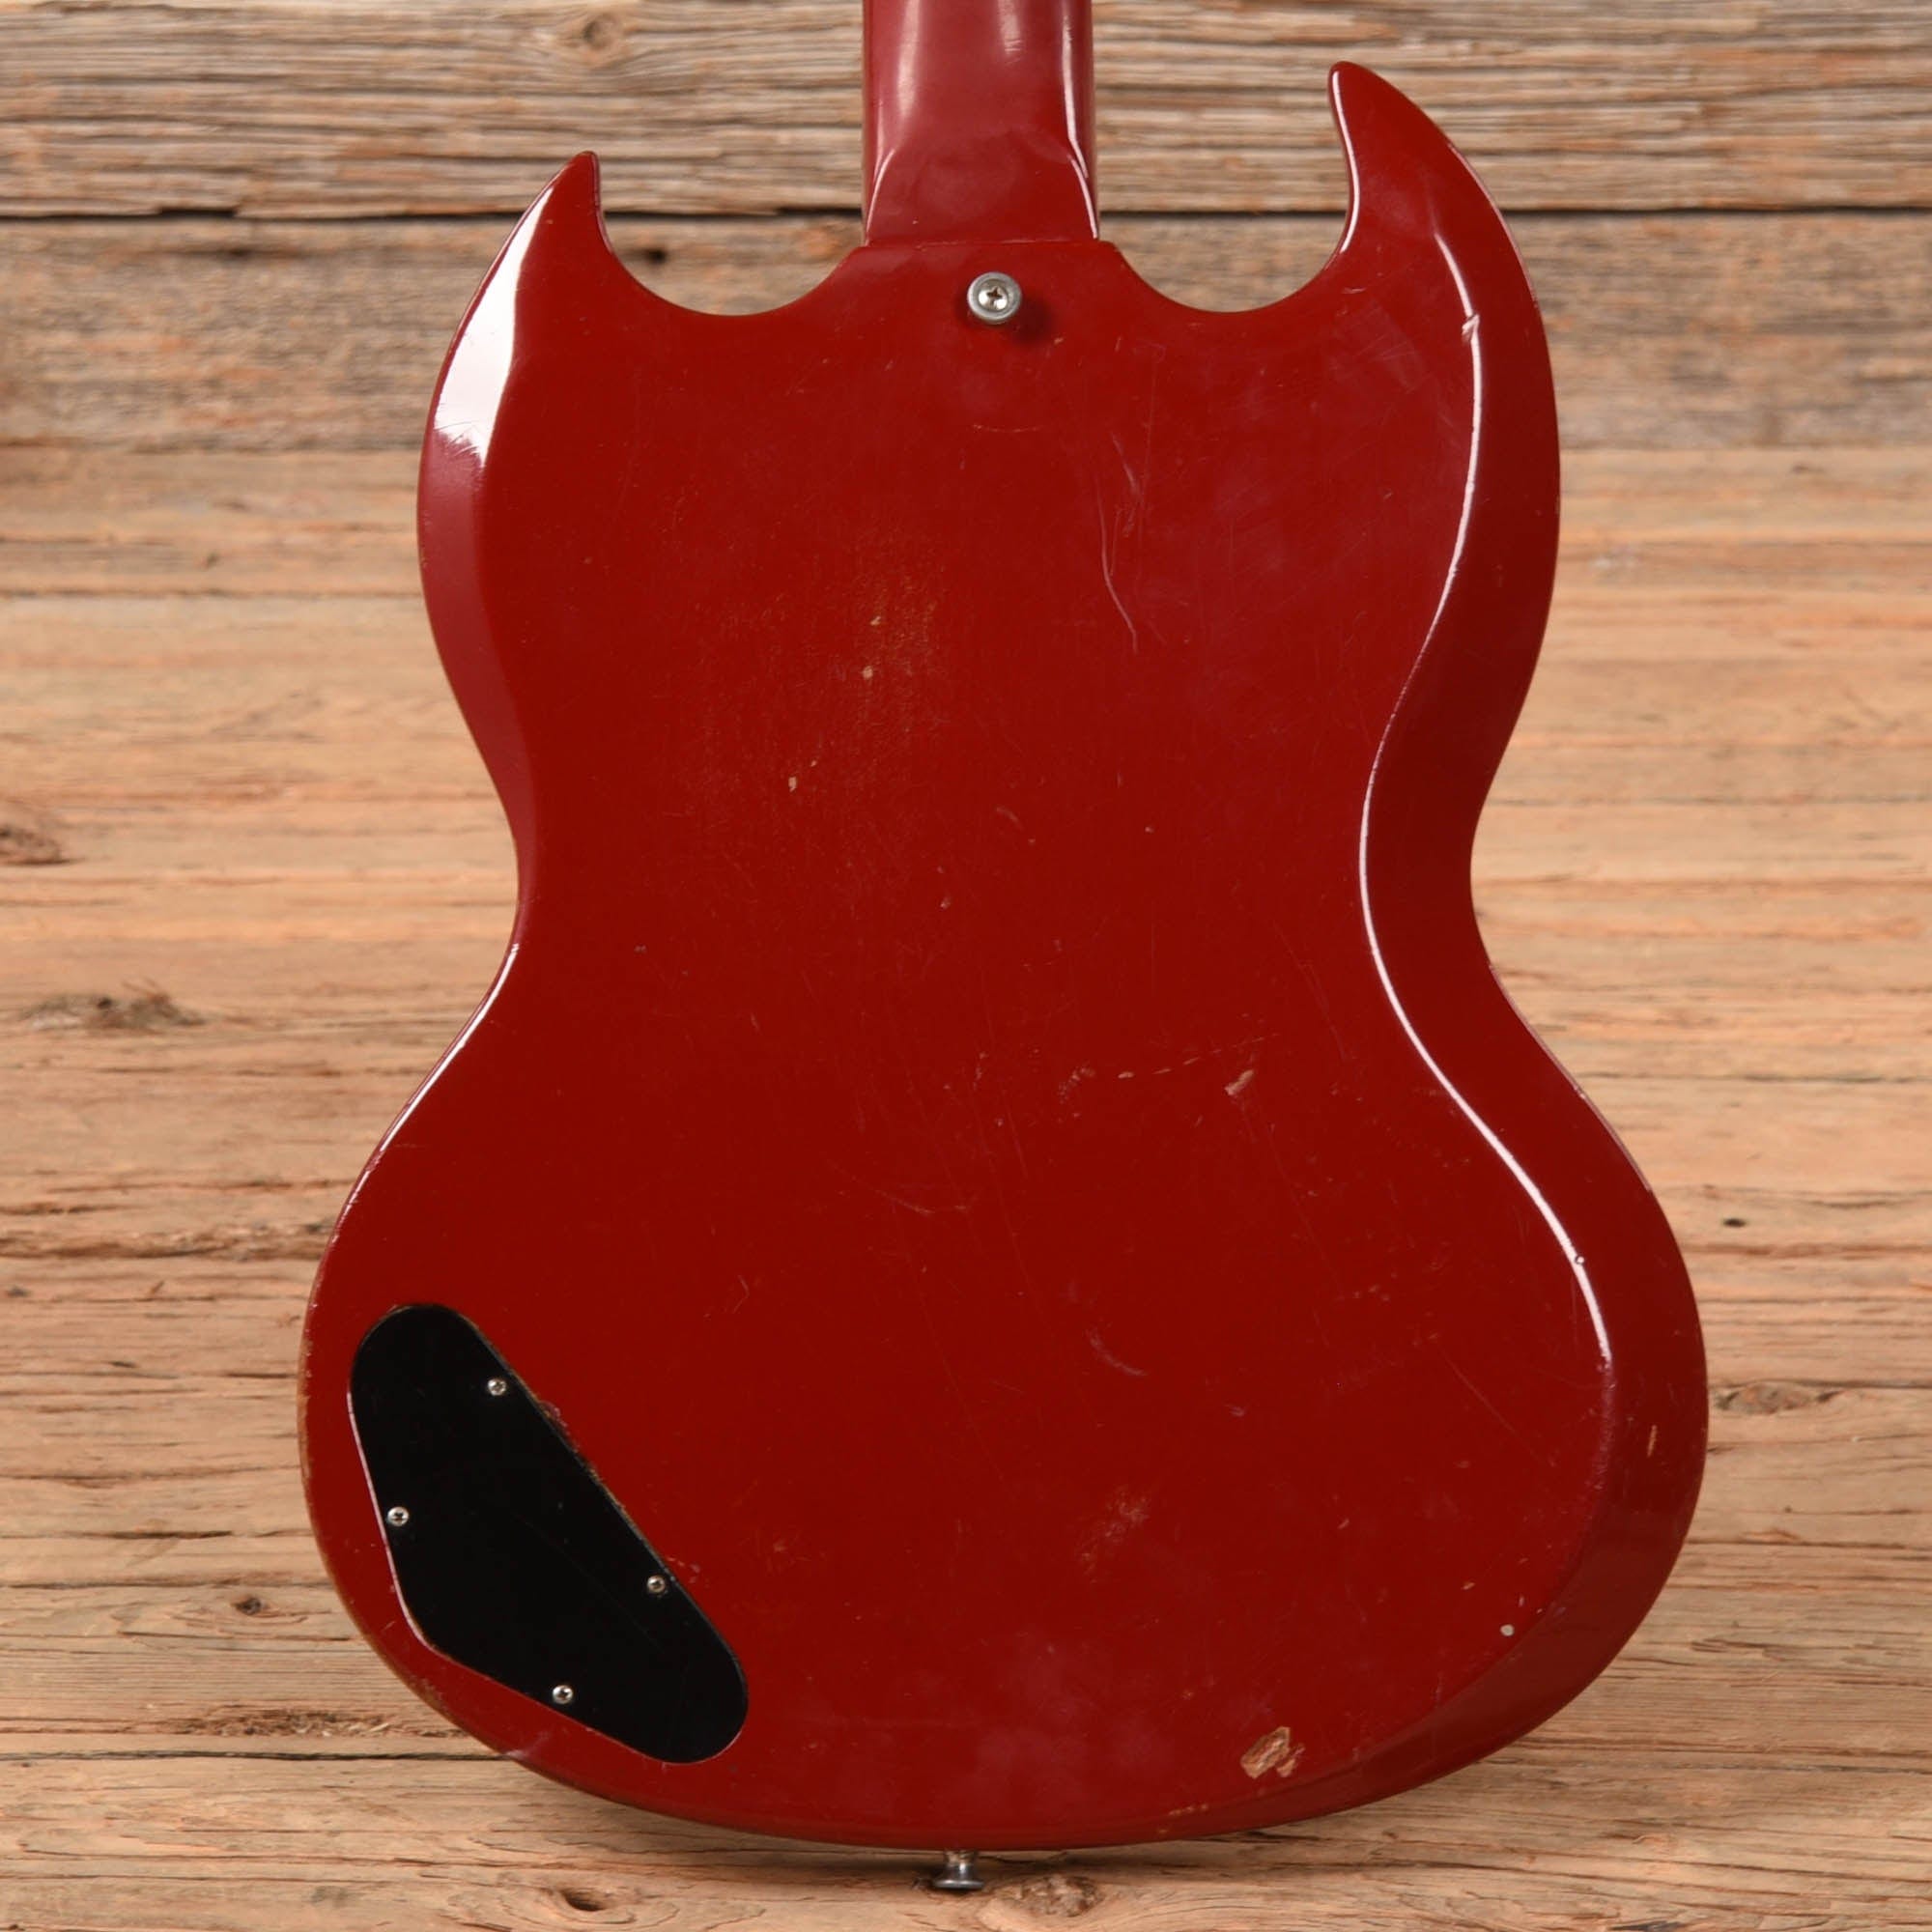 Gibson SG Junior Cardinal Red 1965 Electric Guitars / Solid Body